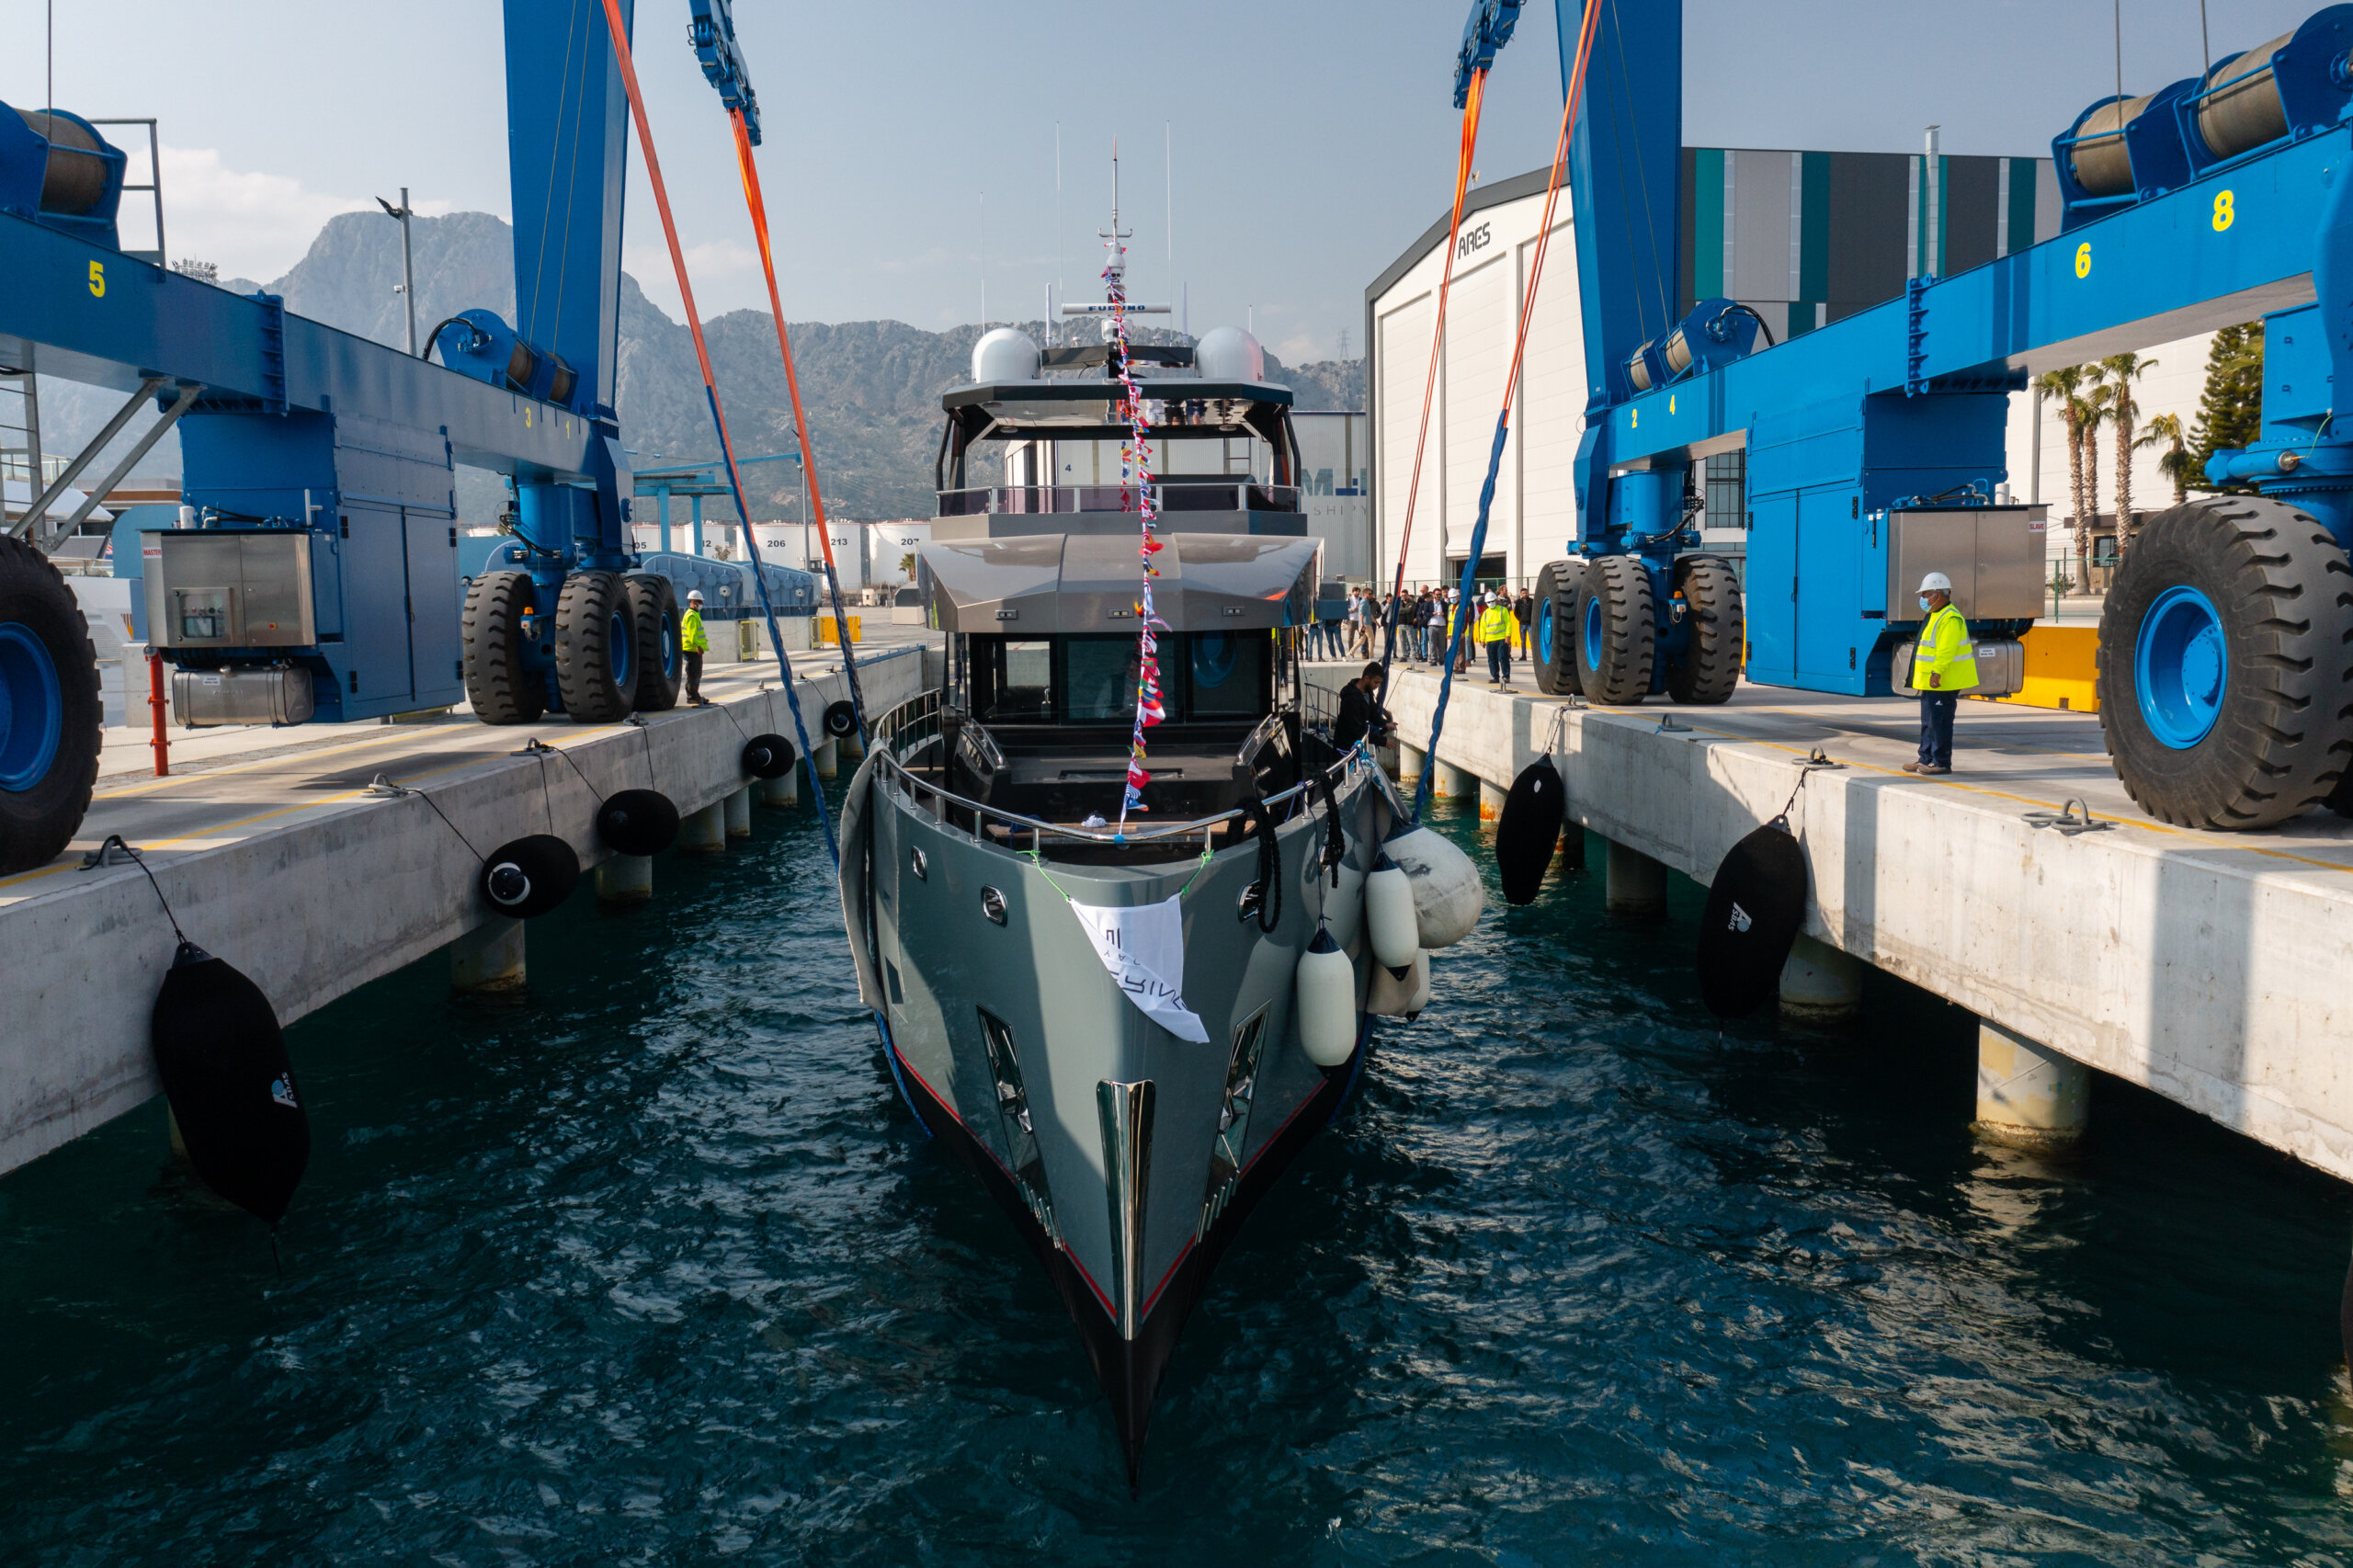 New B70 Yacht launched at Bering Yachts